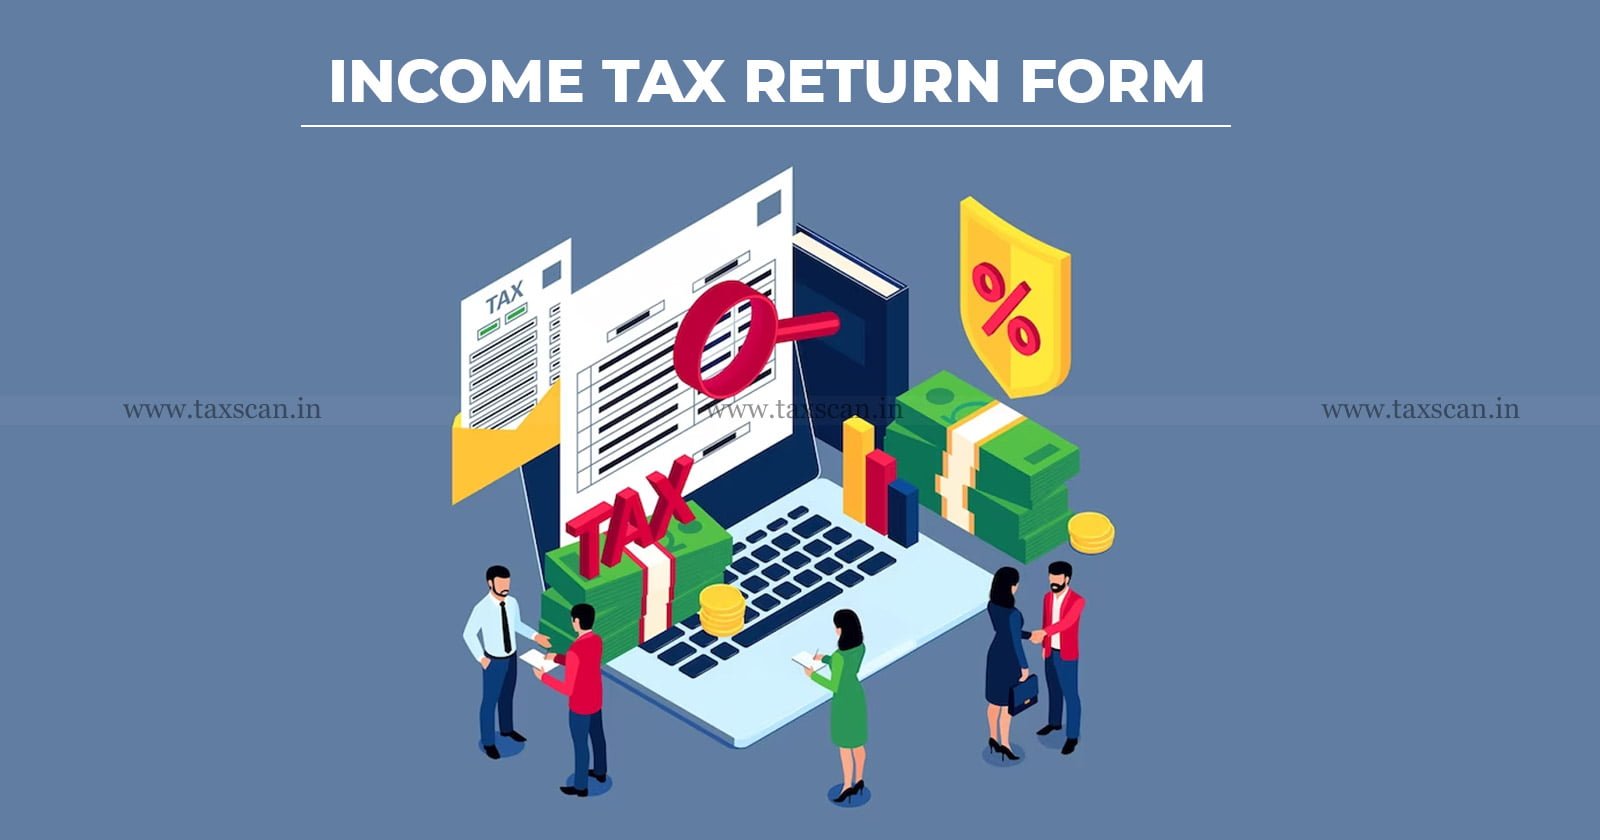 CBDT - Income Tax Returns - CBDT notification for ITR forms - ITR filing updates - Changes in ITR forms - Taxscan